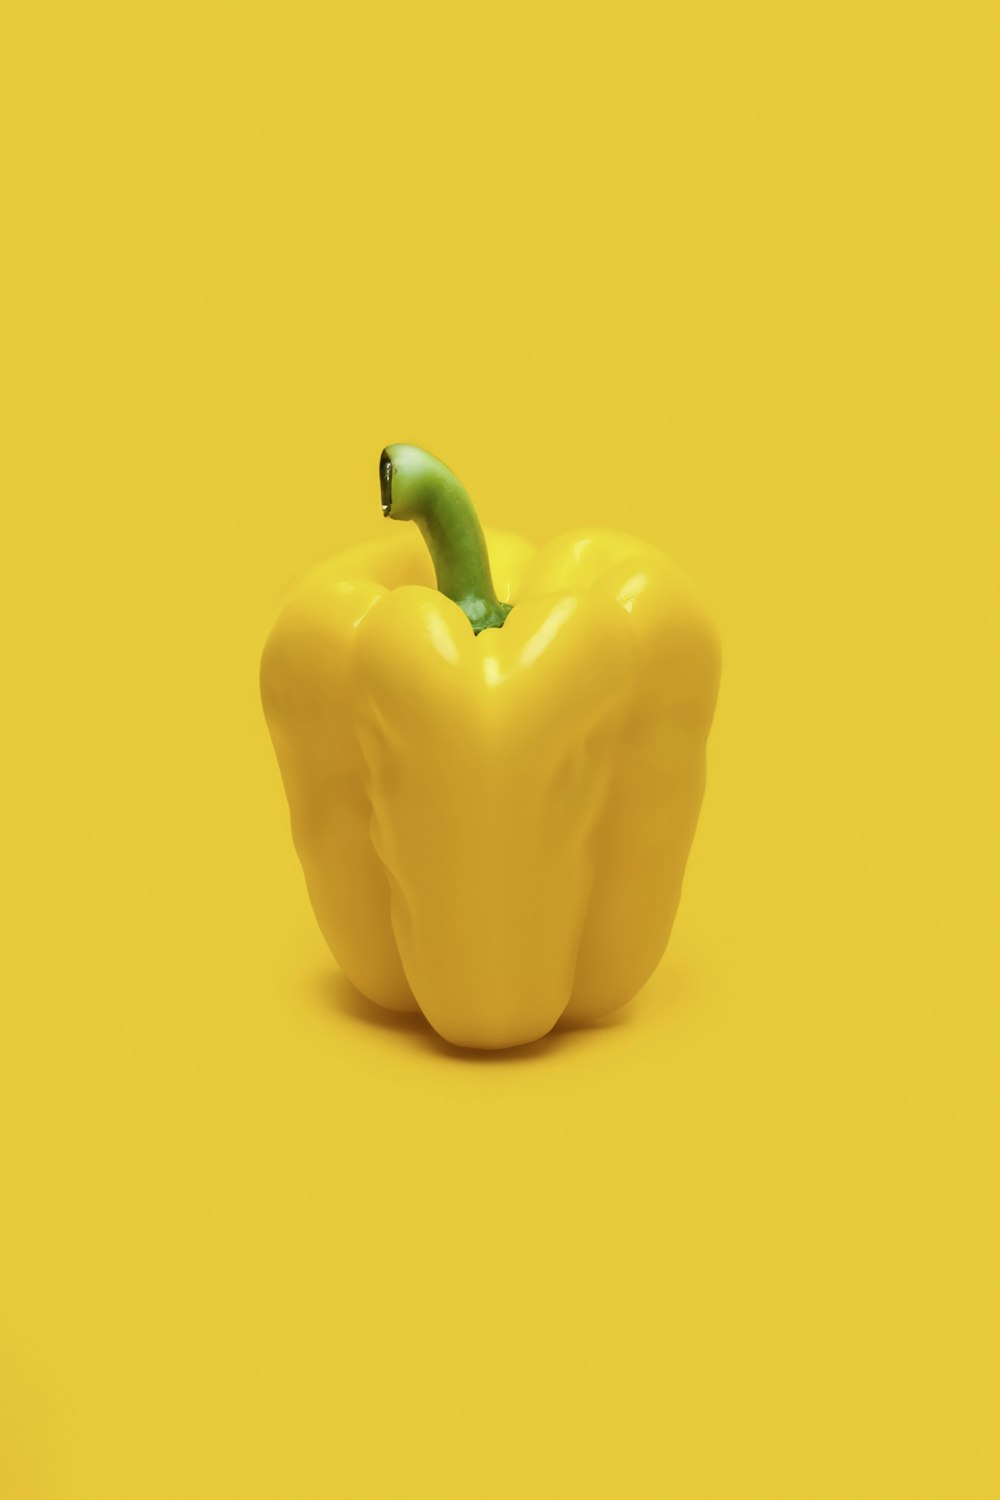 a yellow pepper on a yellow background